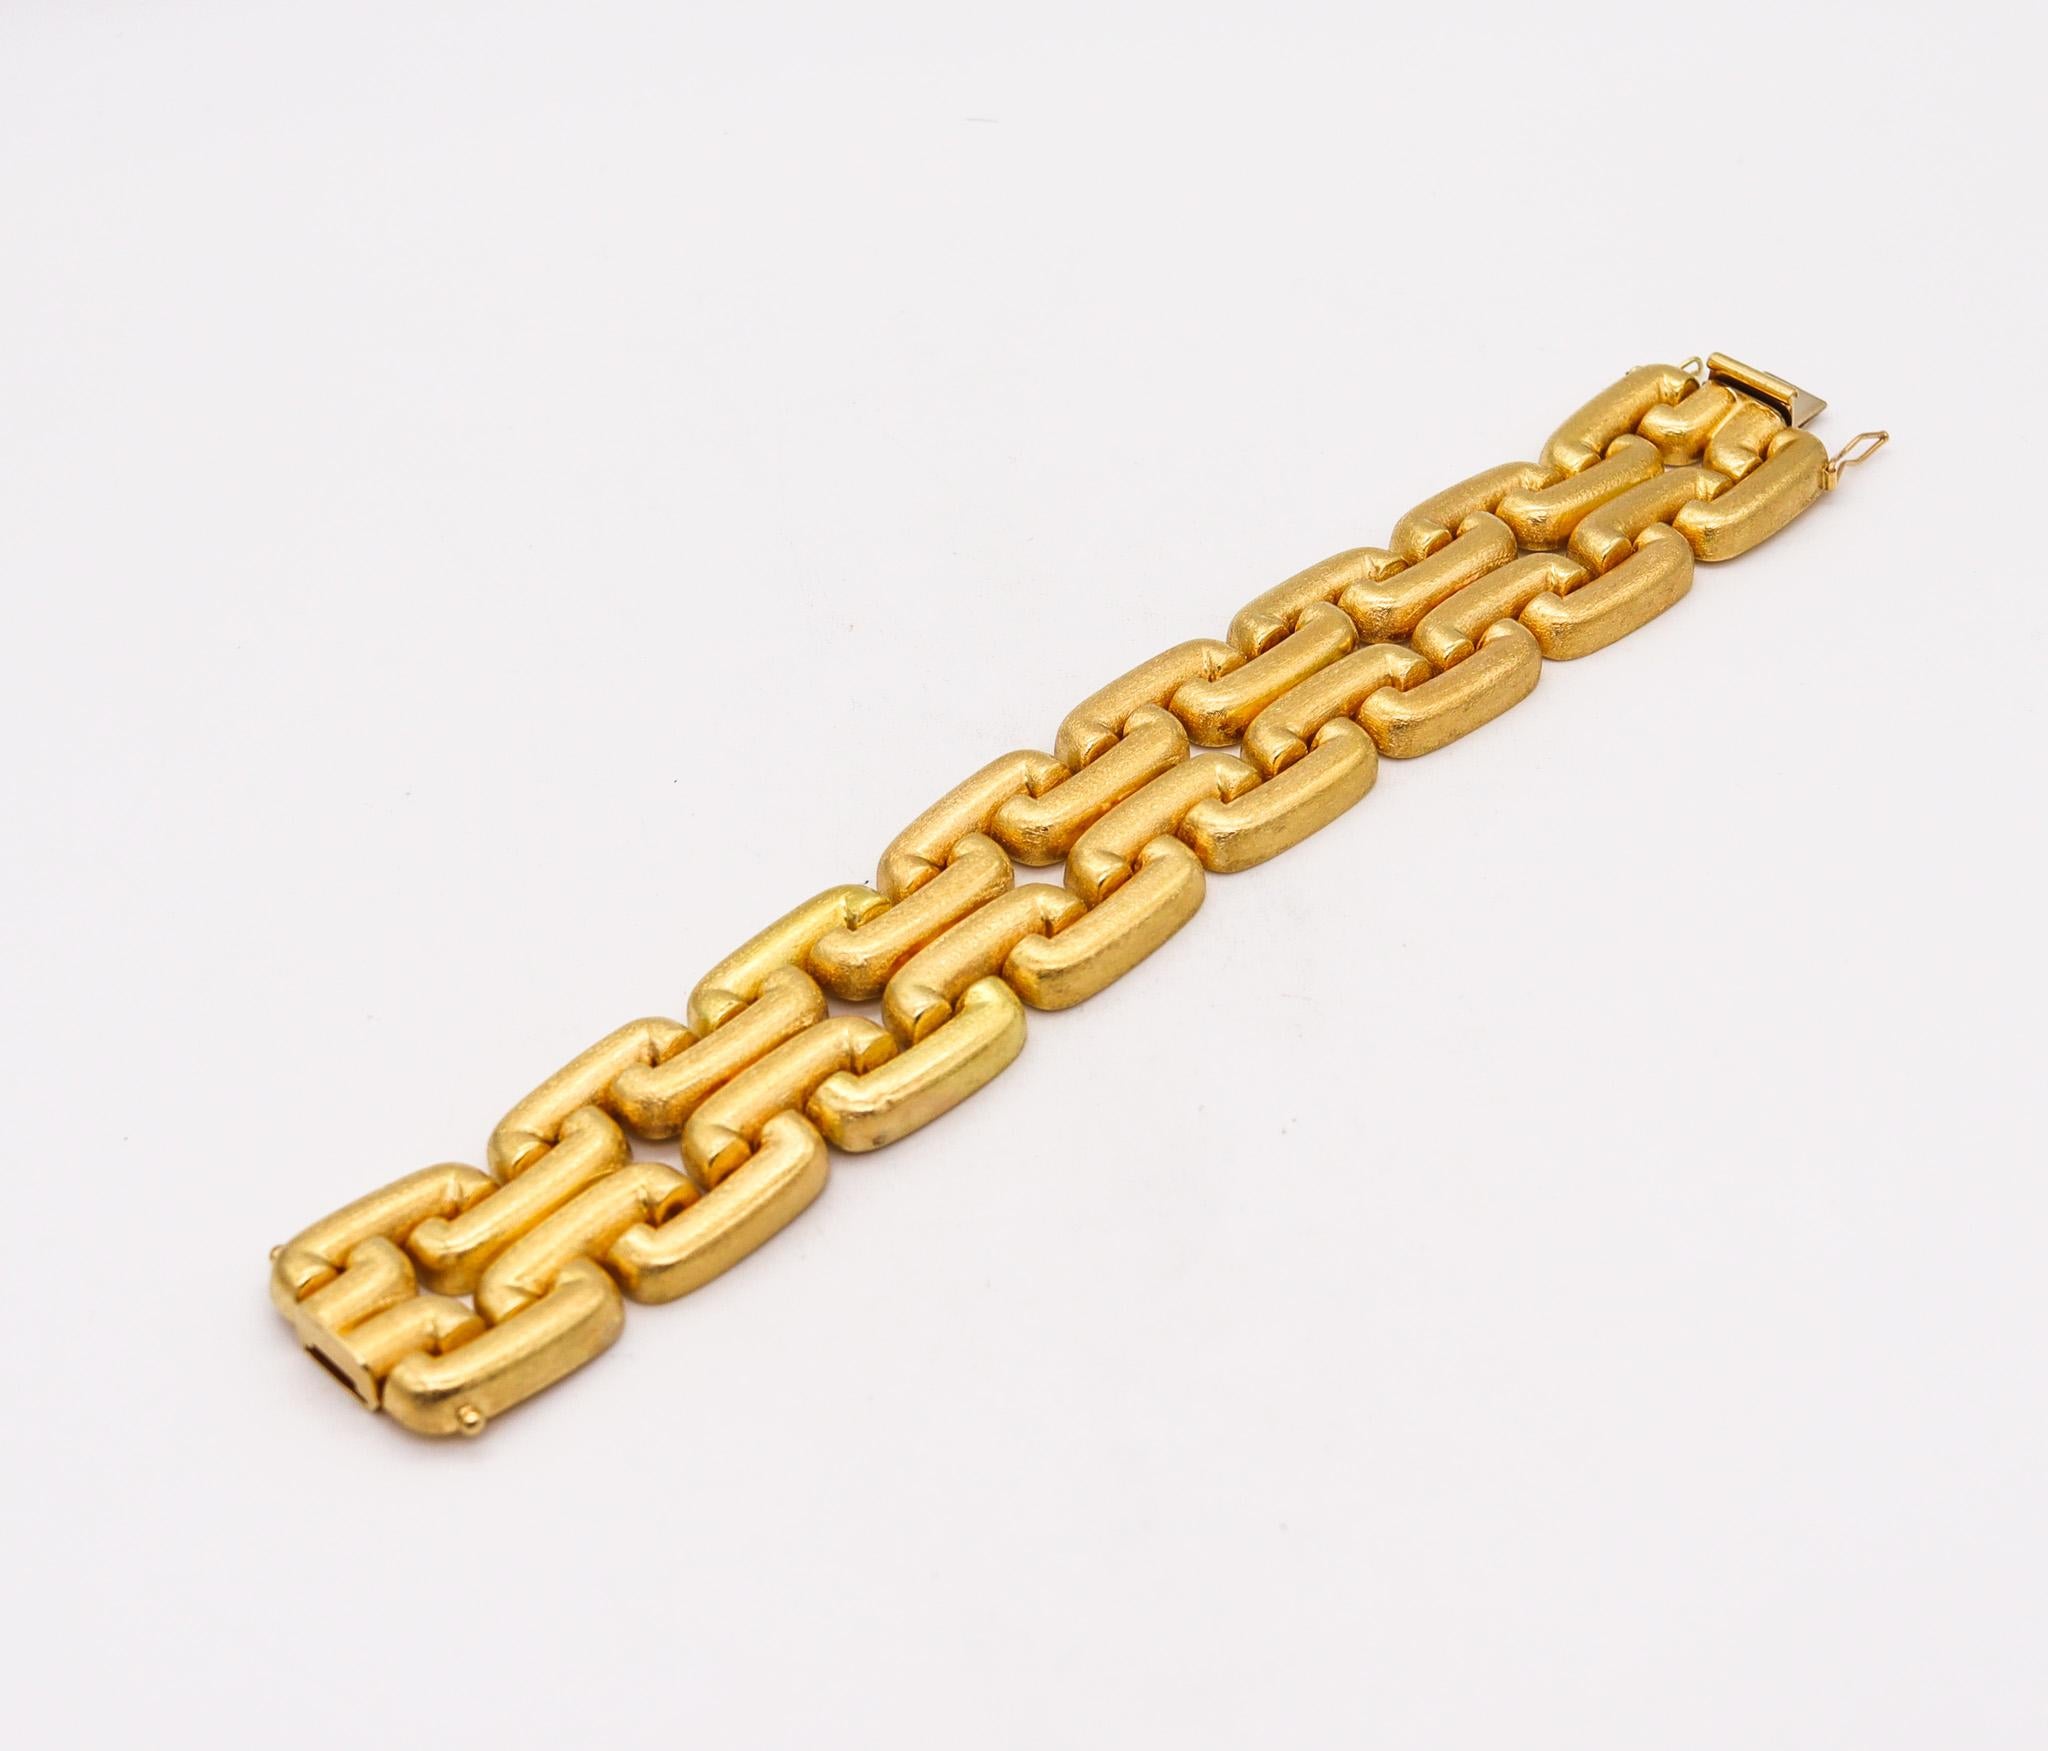 Italy 1950 Midcentury Geometric Links Bracelet in Brushed 18 Karat Yellow Gold In Excellent Condition For Sale In Miami, FL